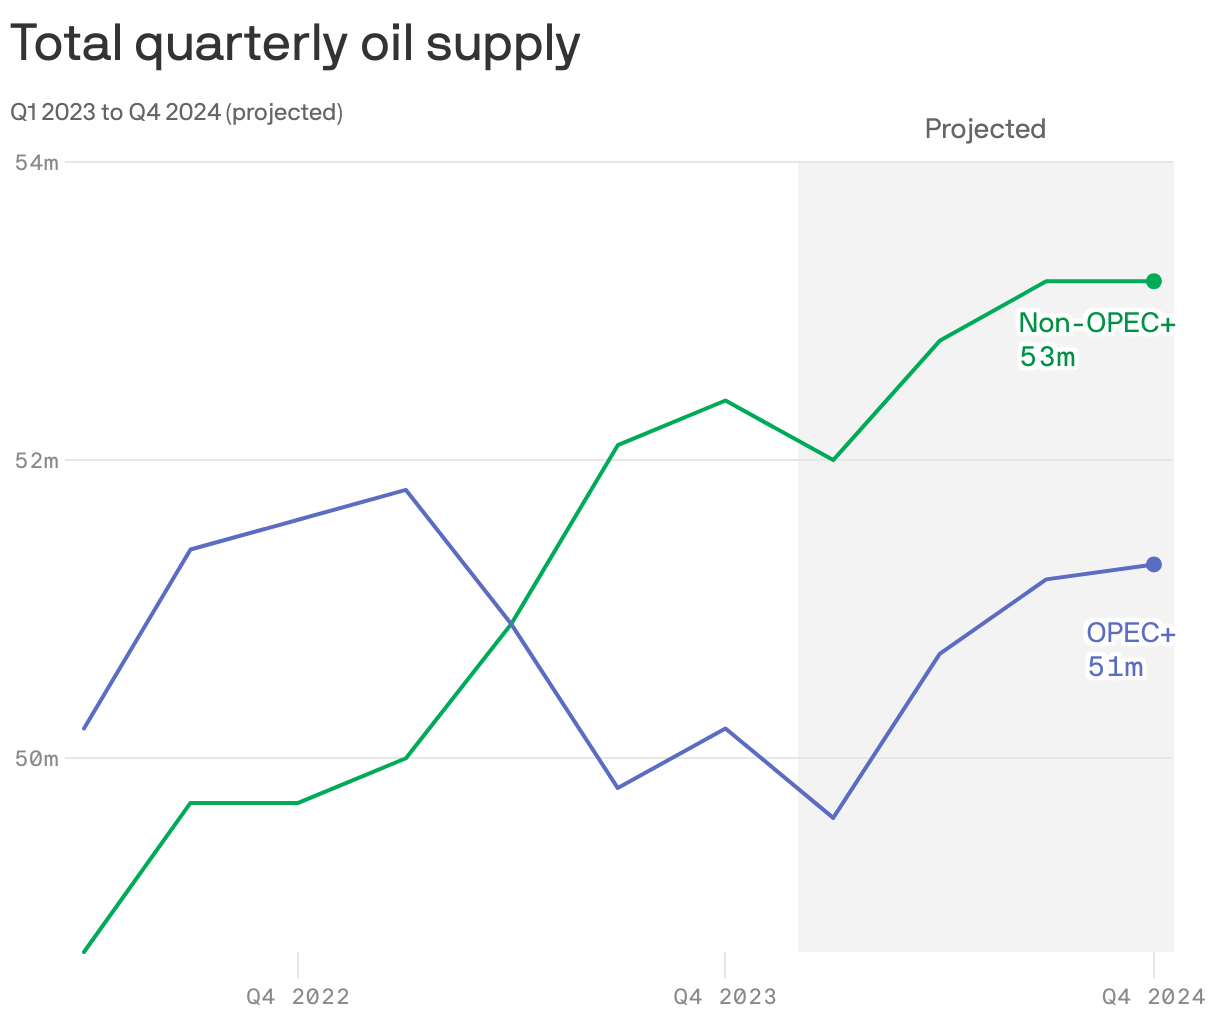 Total quarterly oil supply